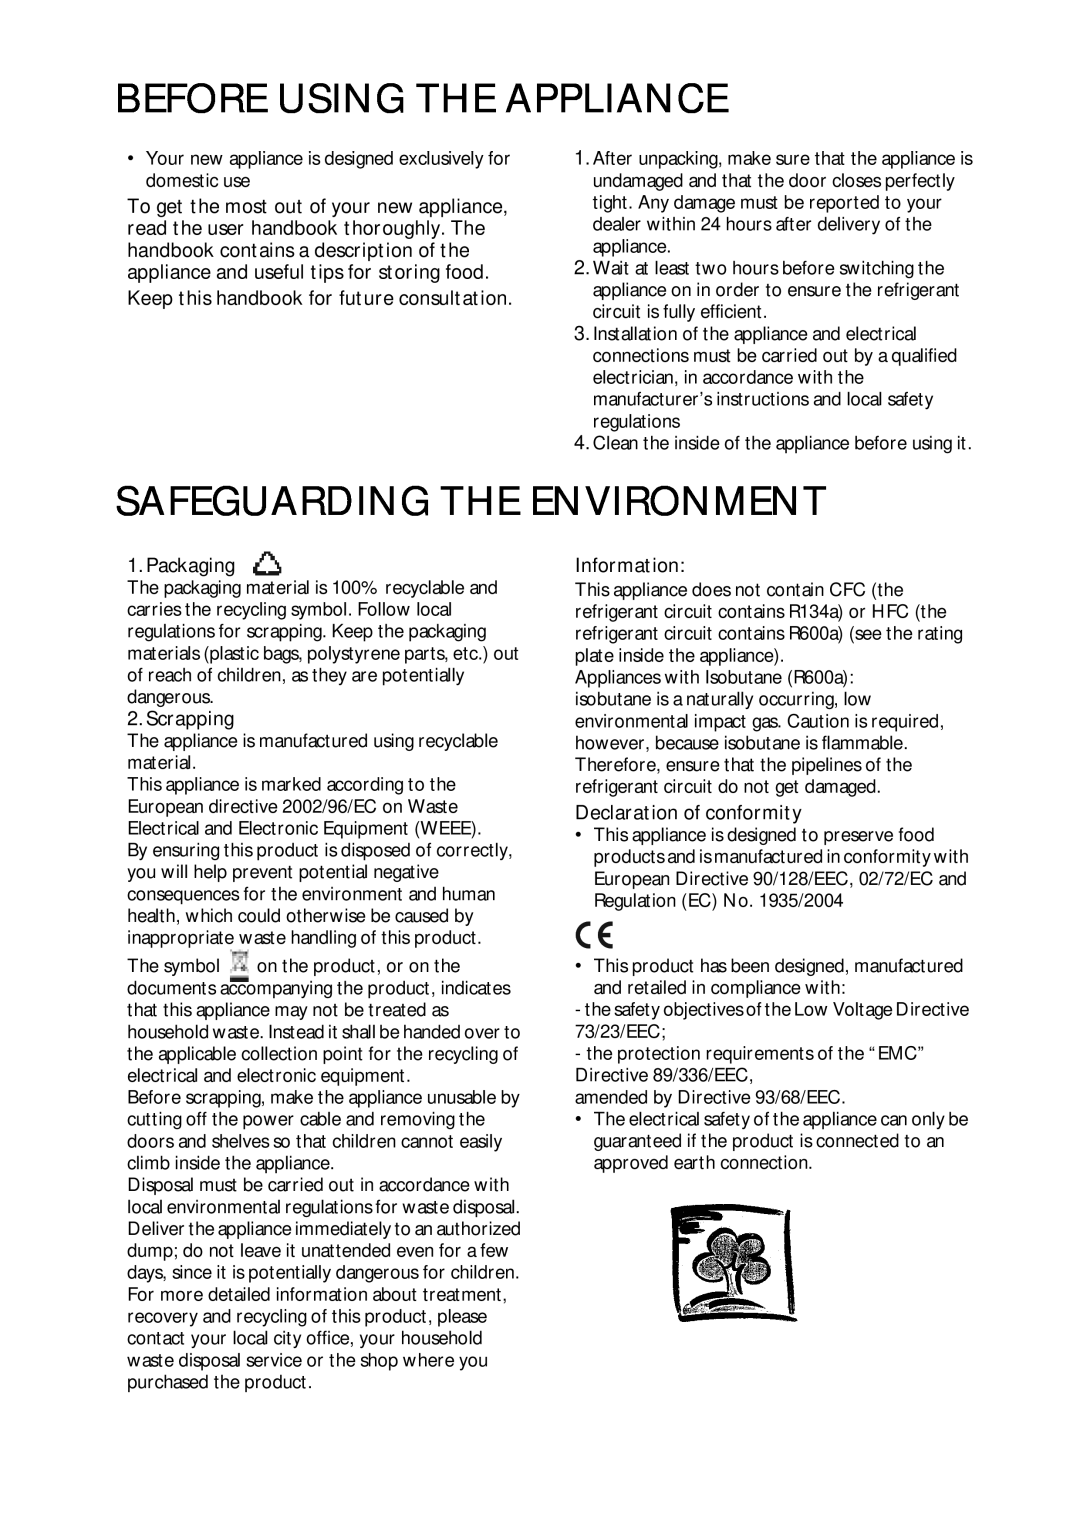 CDA FW420 Before Using The Appliance, Safeguarding The Environment, Keep this handbook for future consultation, Packaging 